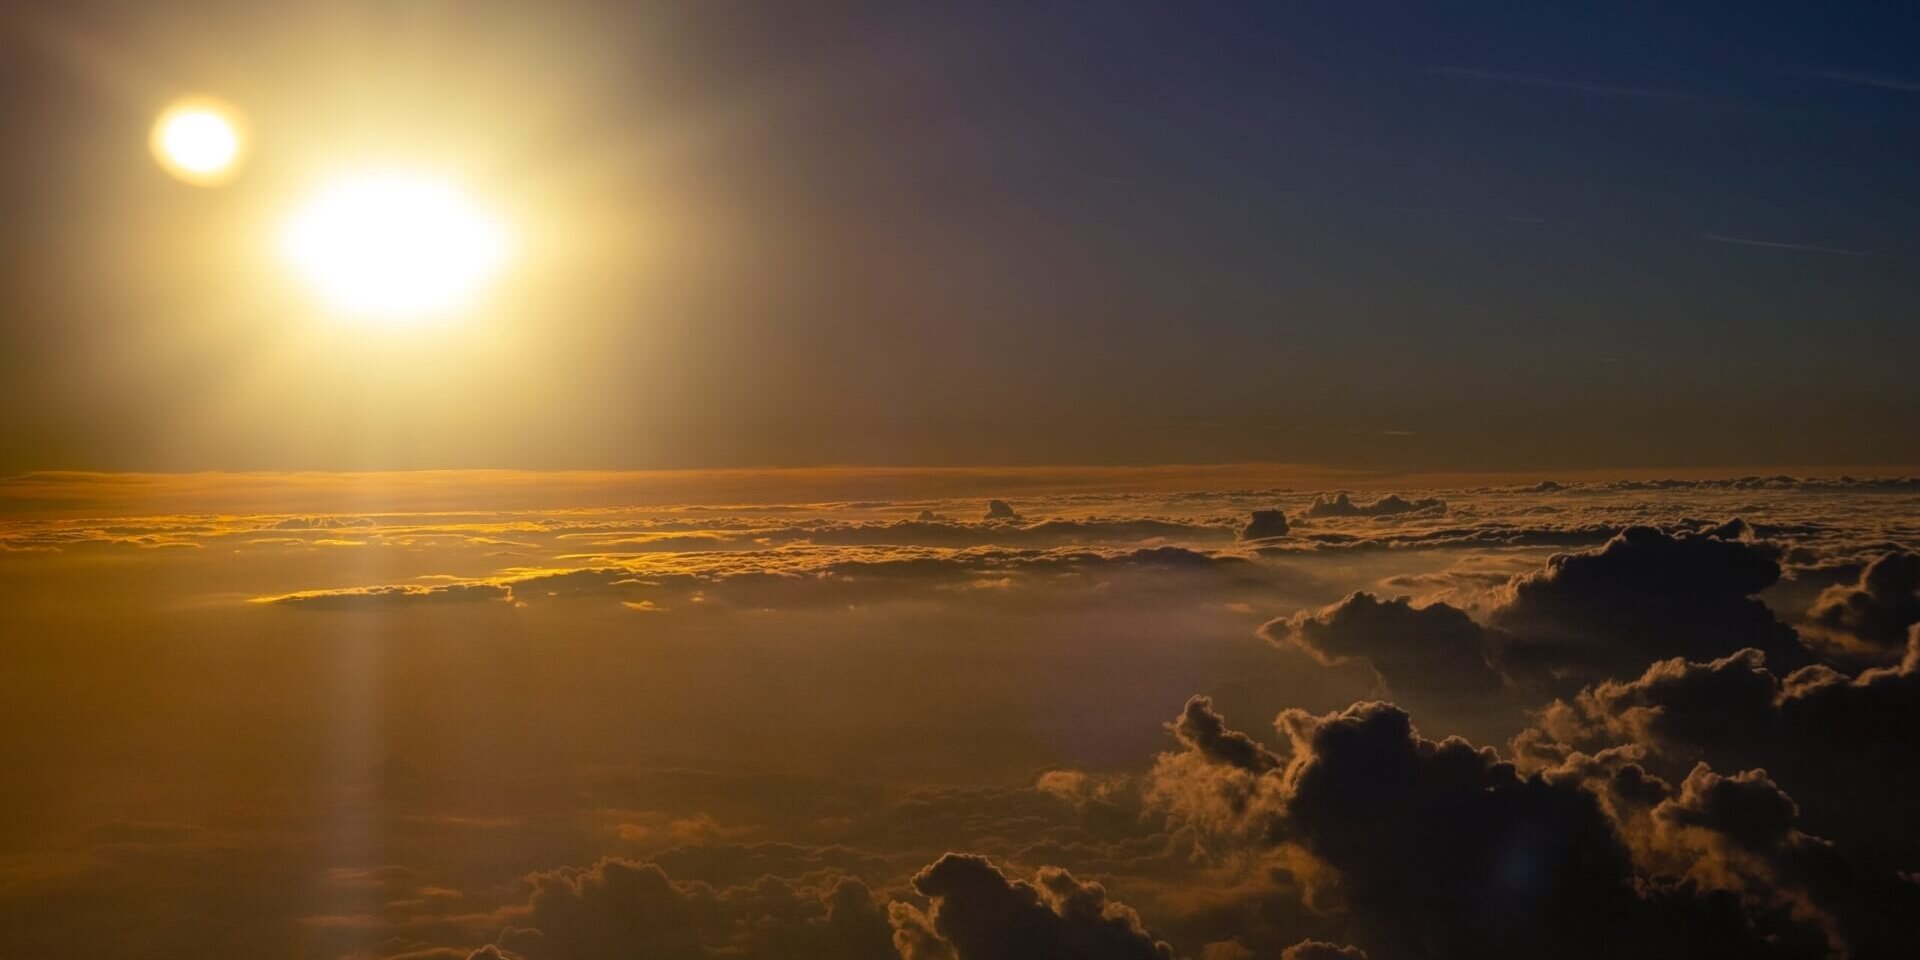 The sun shining over the clouds